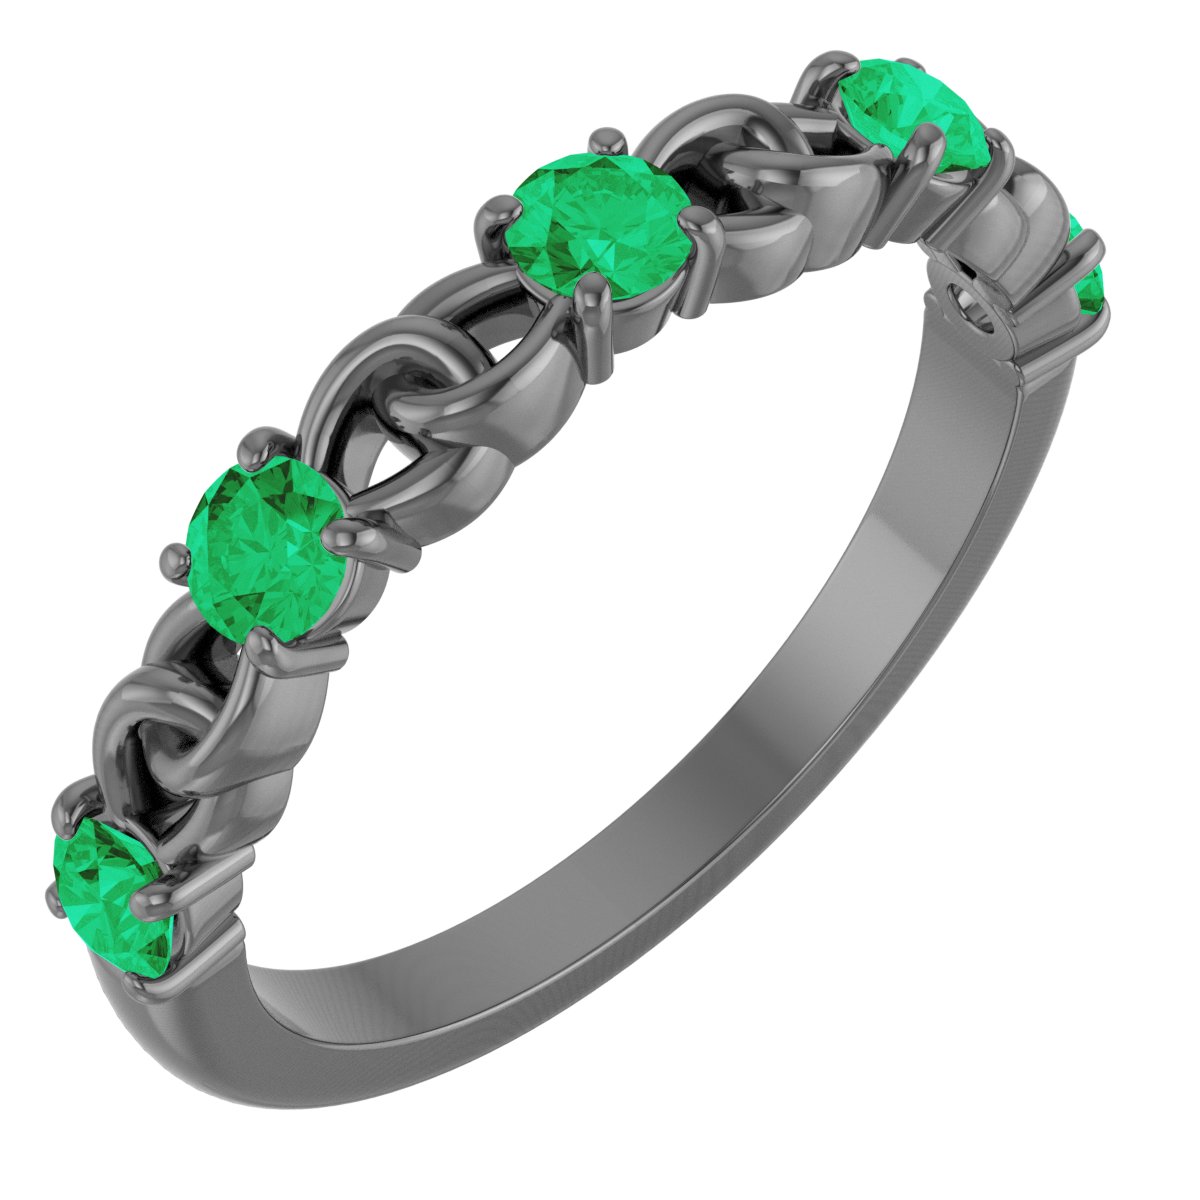 14K White Chatham Created Emerald Stackable Link Ring Ref 14773249